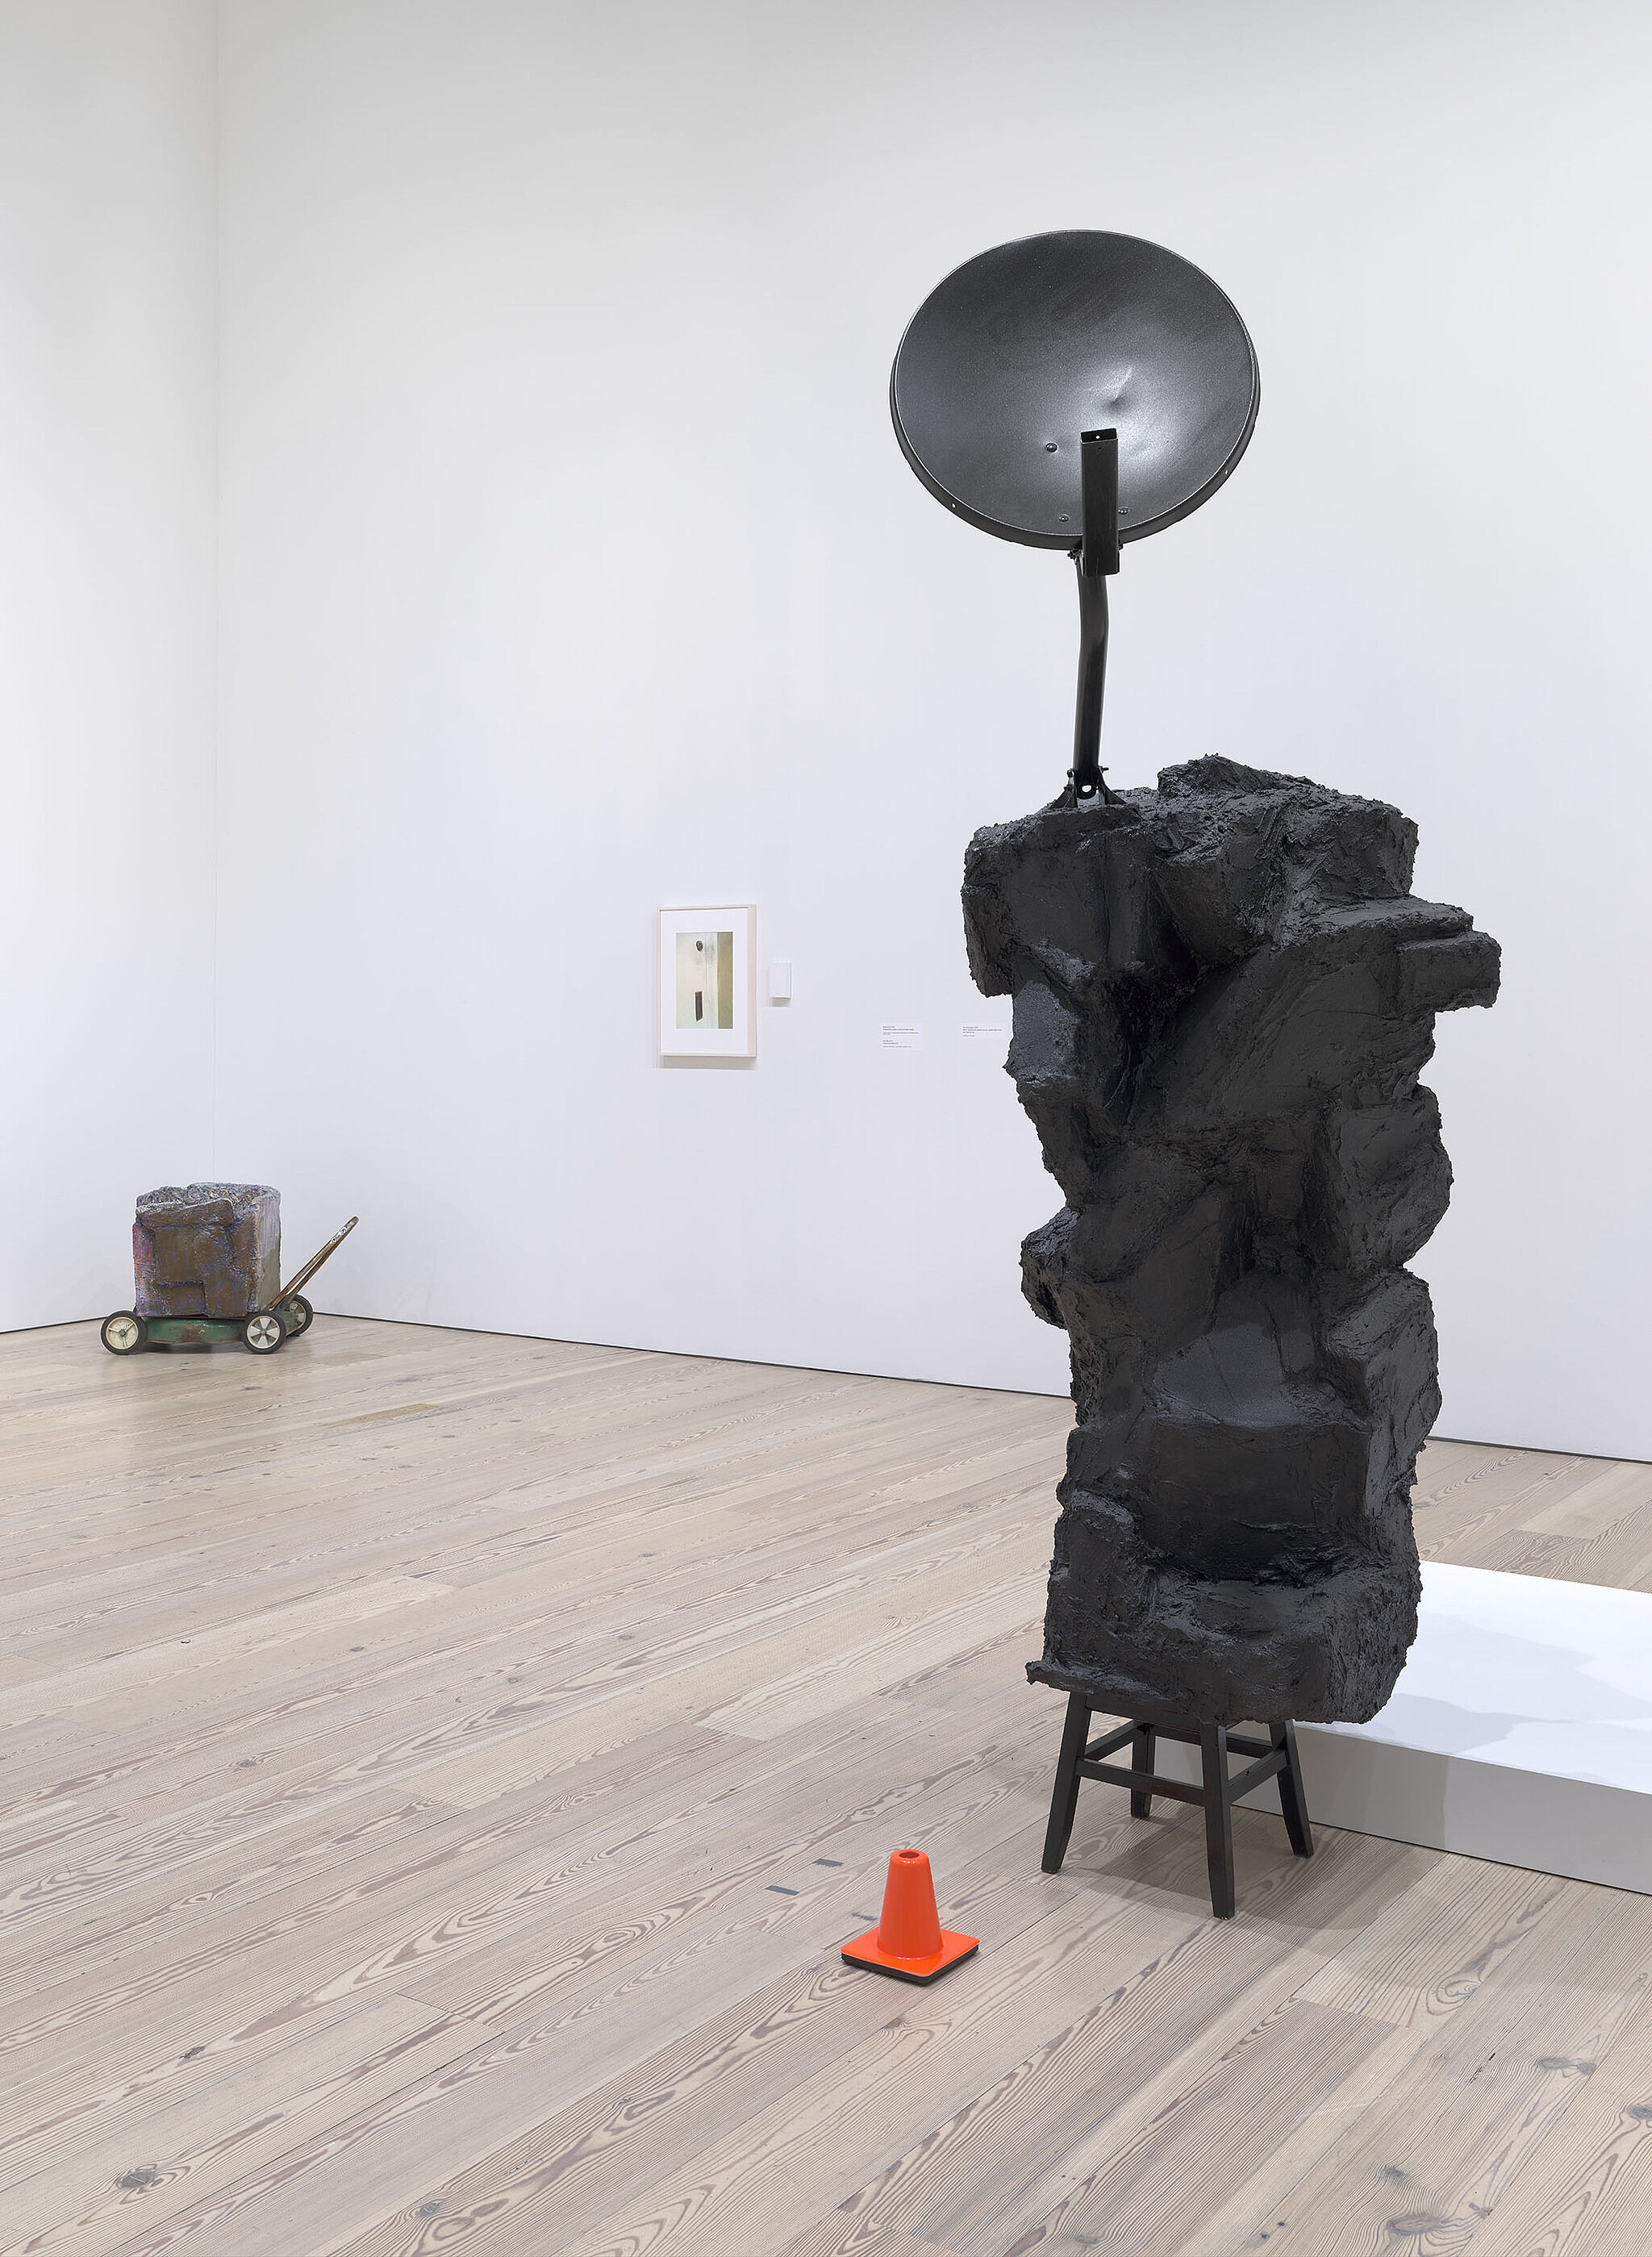 A sculpture with a black satellite dish, a black blob, and an orange caution cone.